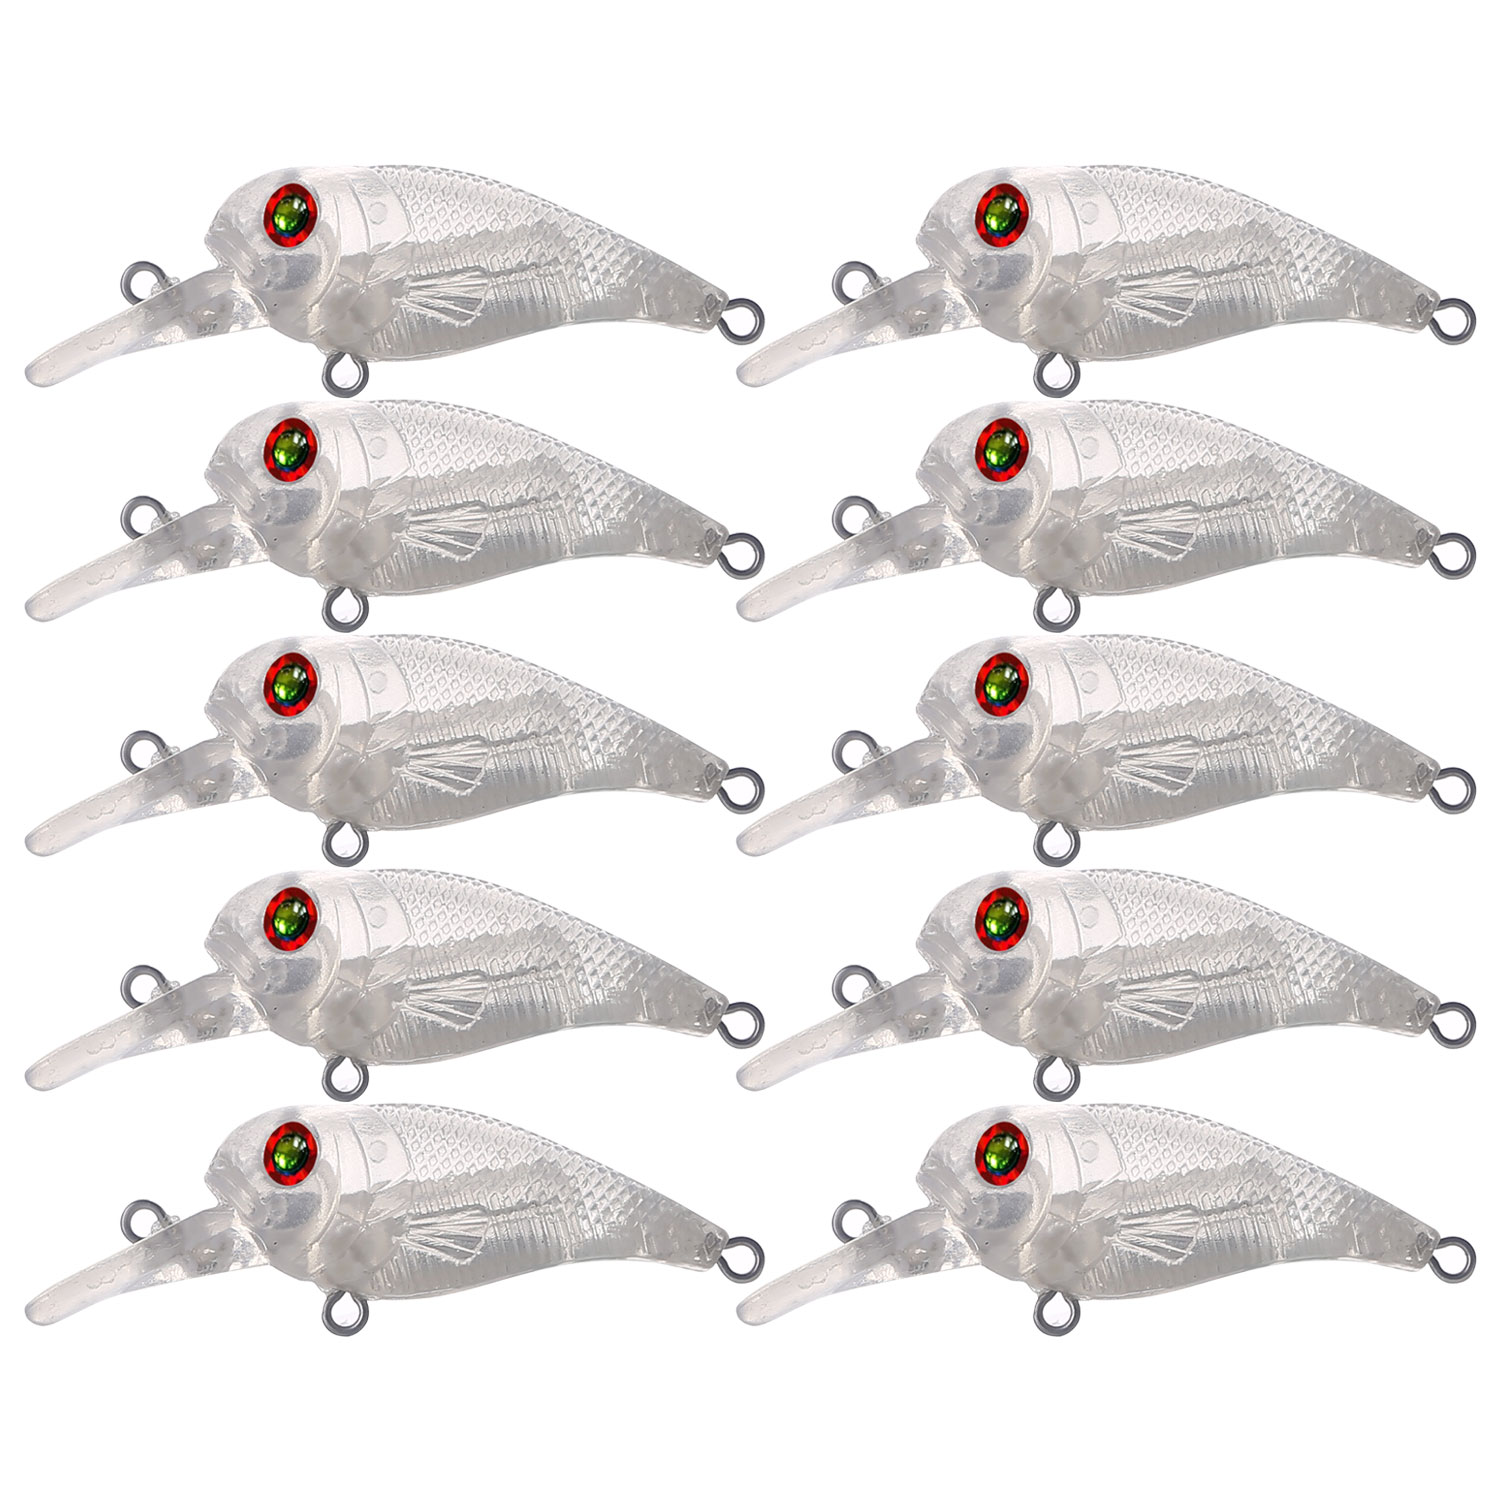  FREE FISHER Unpainted Fishing Lures, 20pcs Clear Crankbait  Blanks Bodies, Blank Pencil Baits, Assorted Hard Plastic Square Crankbait  Blank Lure Baits 11.5cm/12.9g : Sports & Outdoors